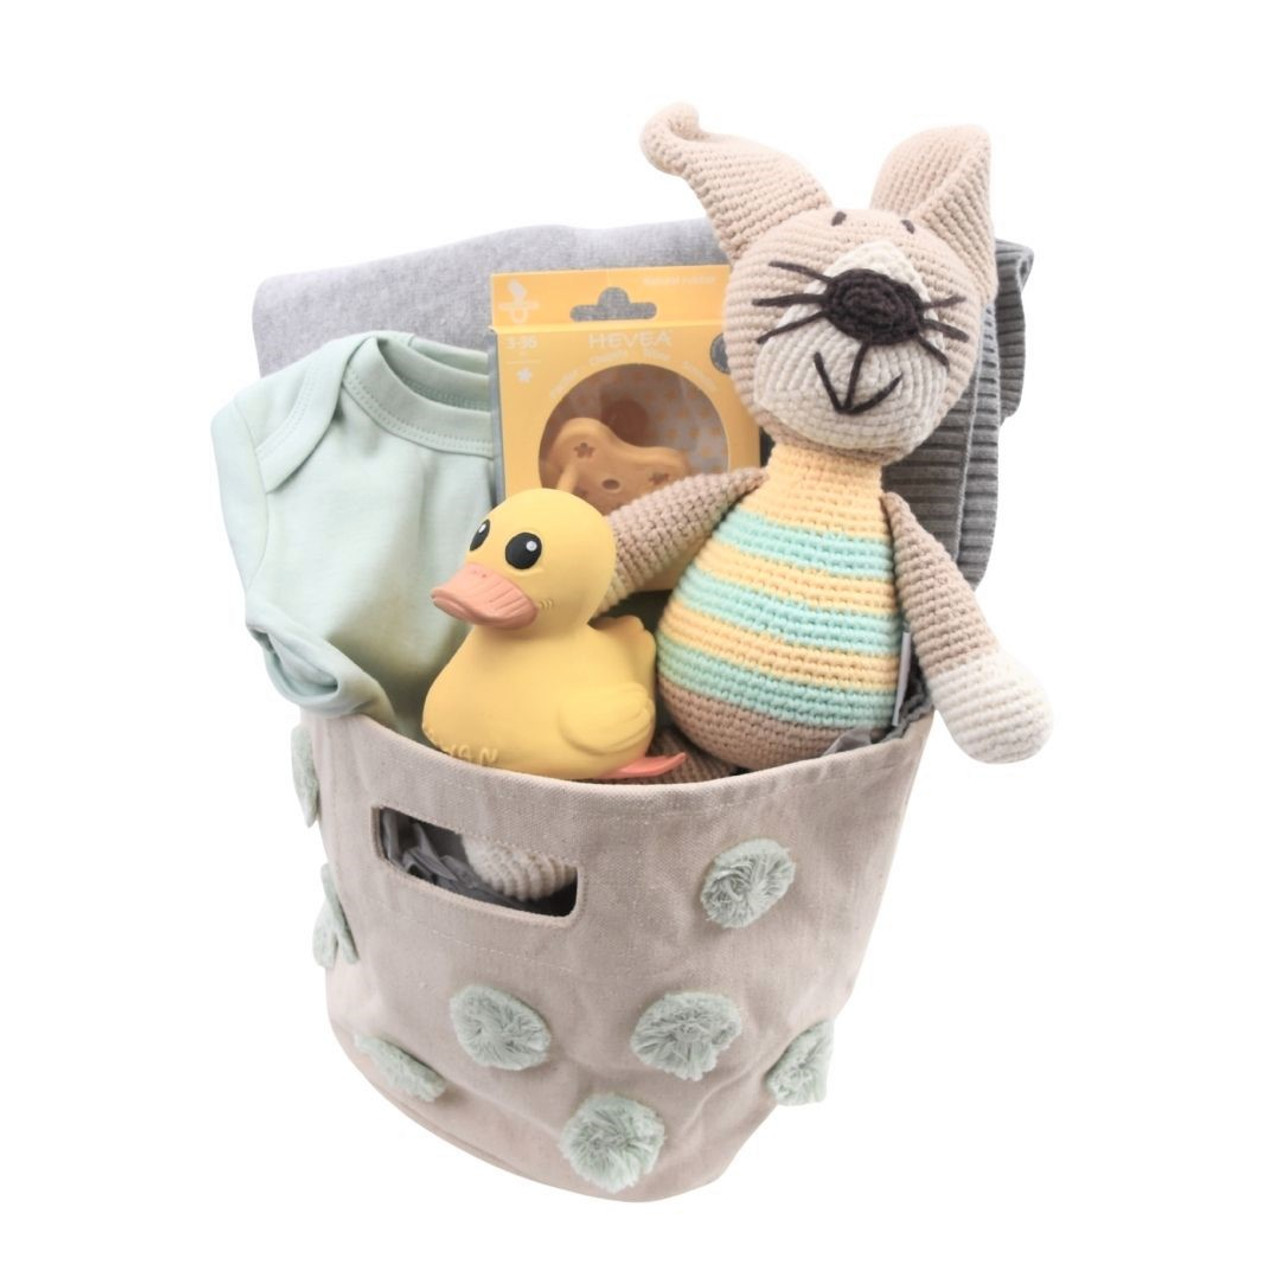 MOM CARE Newborn Baby Gift Set Has All Newborn Baby Essential Clothes in Baby  Gift Set for or Girls Unisex 11 pcs Blue : Amazon.in: Baby Products